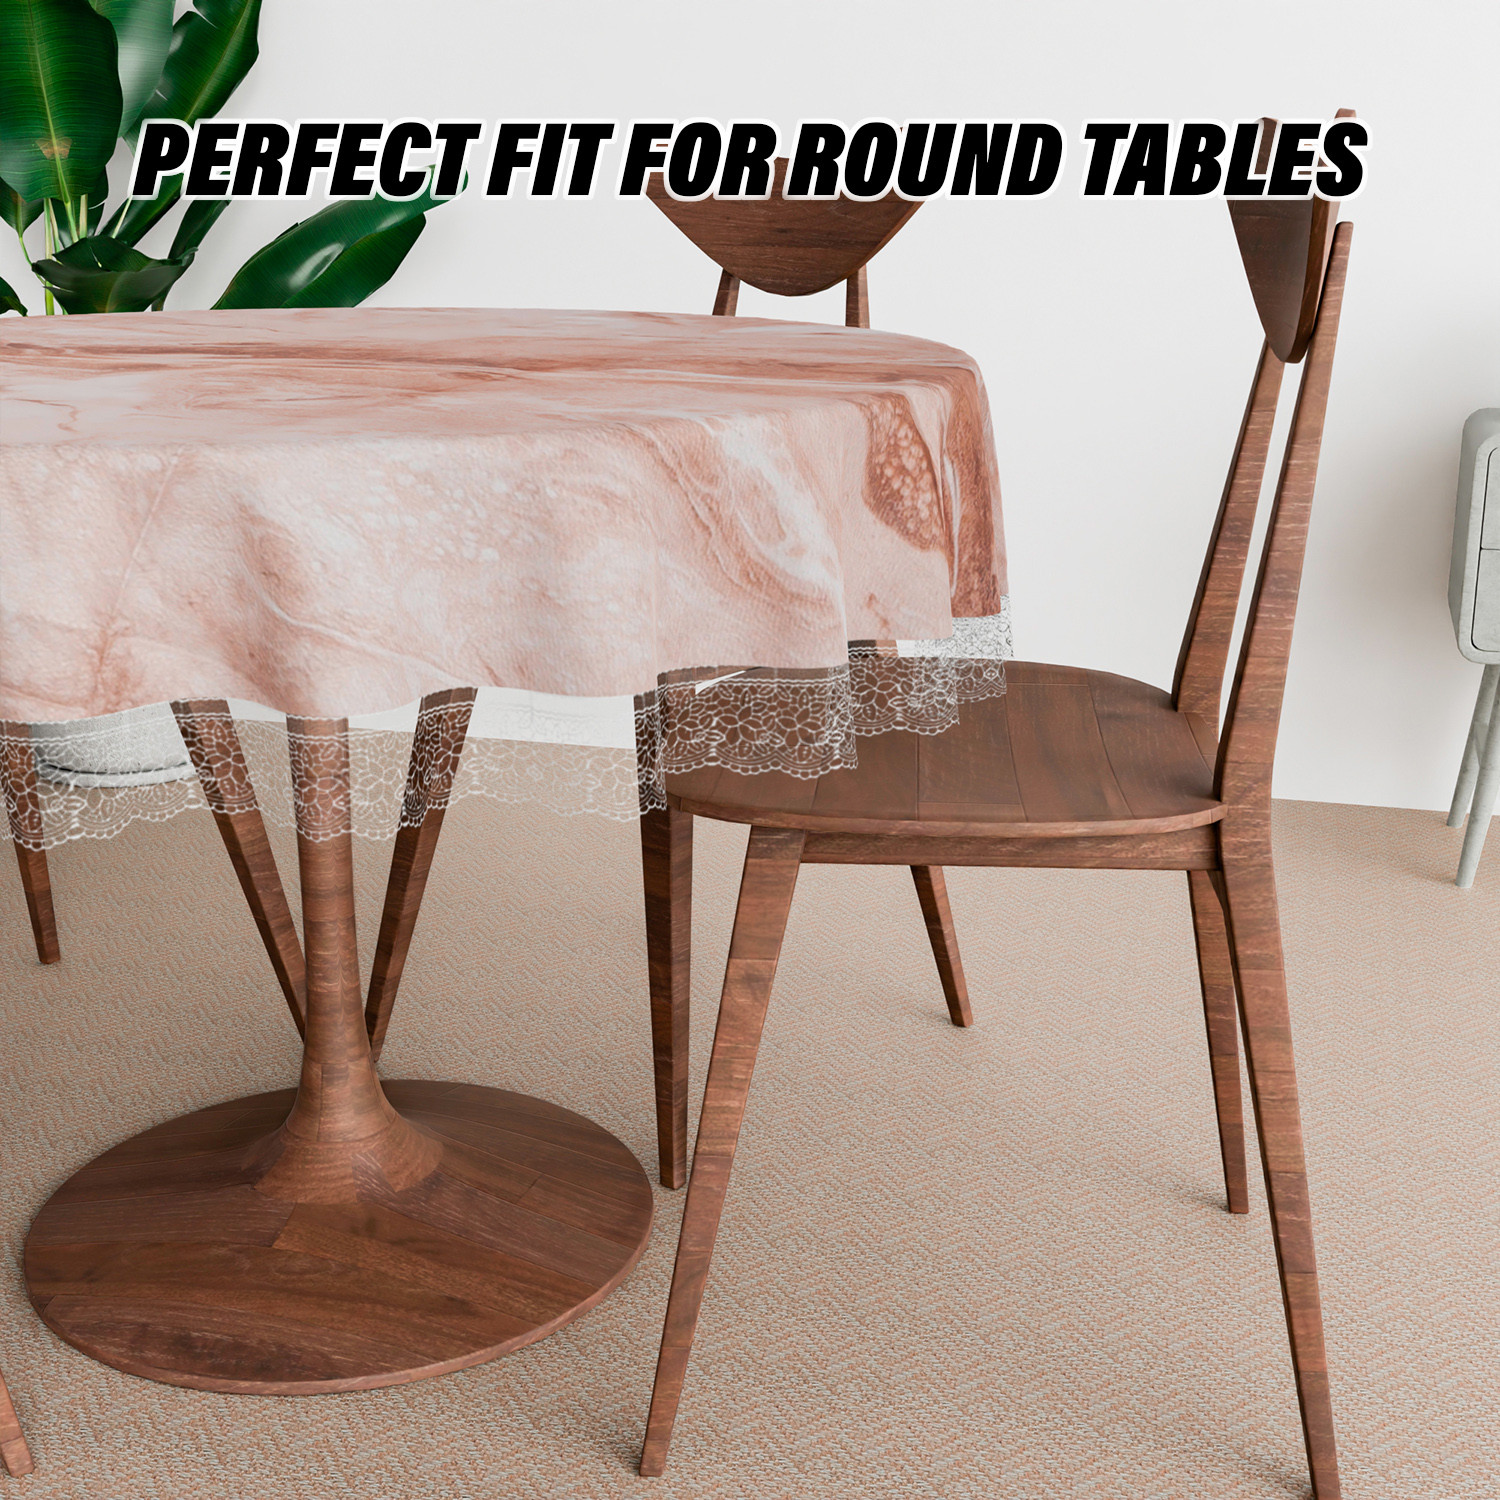 Kuber Industries Round Table Cover | PVC Table Cloth for Round Tables | 4 Seater Round Table Cloth | Marble Kitchen Dining Tablecloth | Tabletop Cover | 60 Inch | Brown